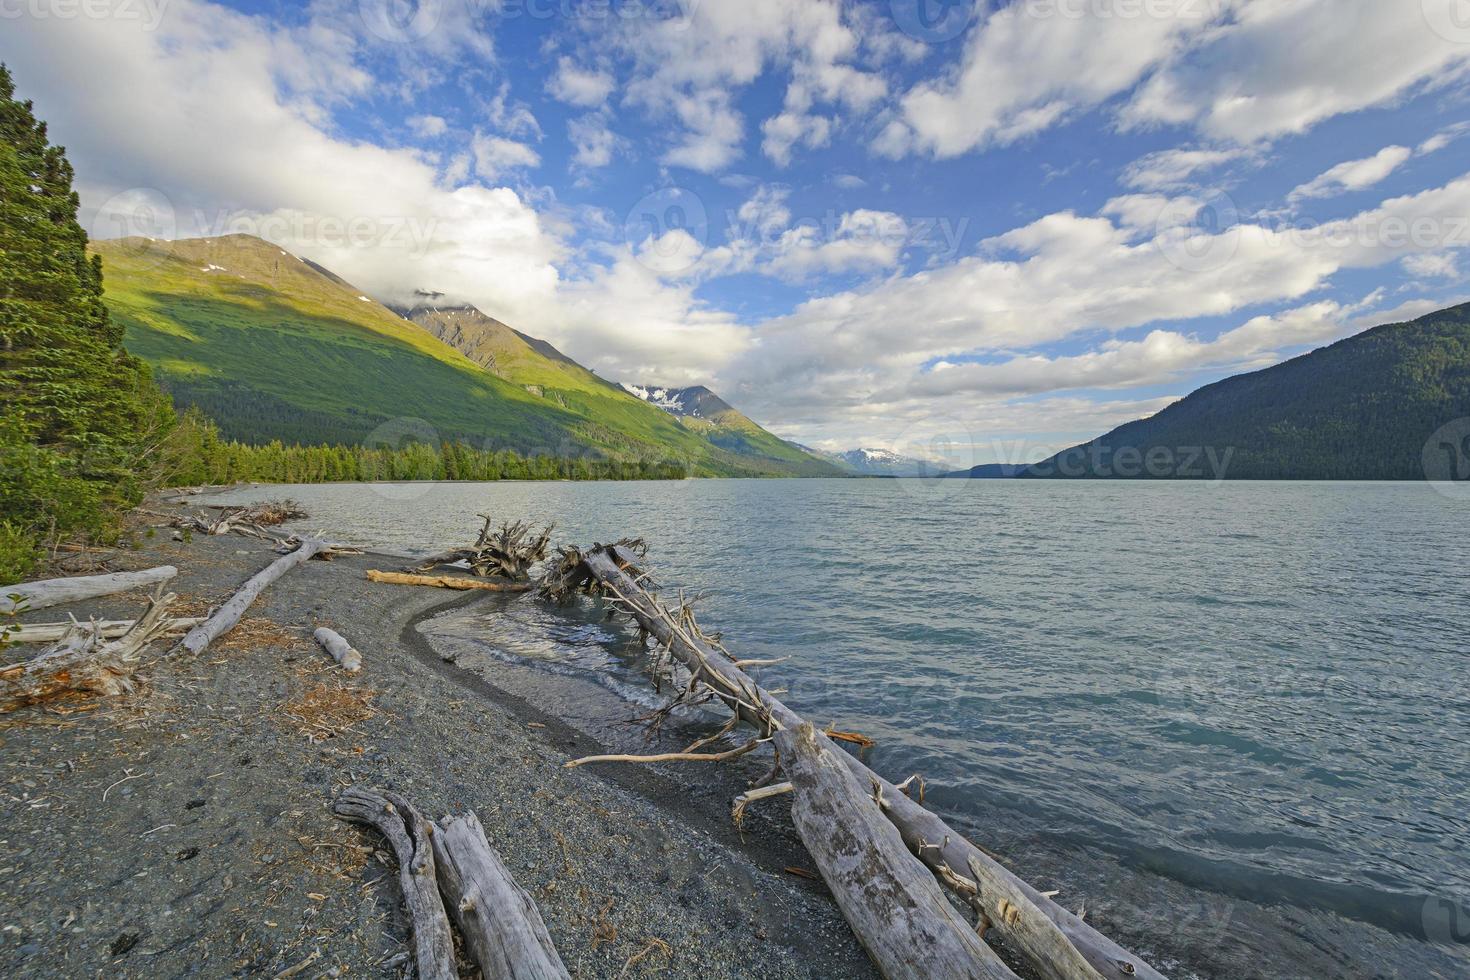 Driftwood on a Remote Alpine Shore photo